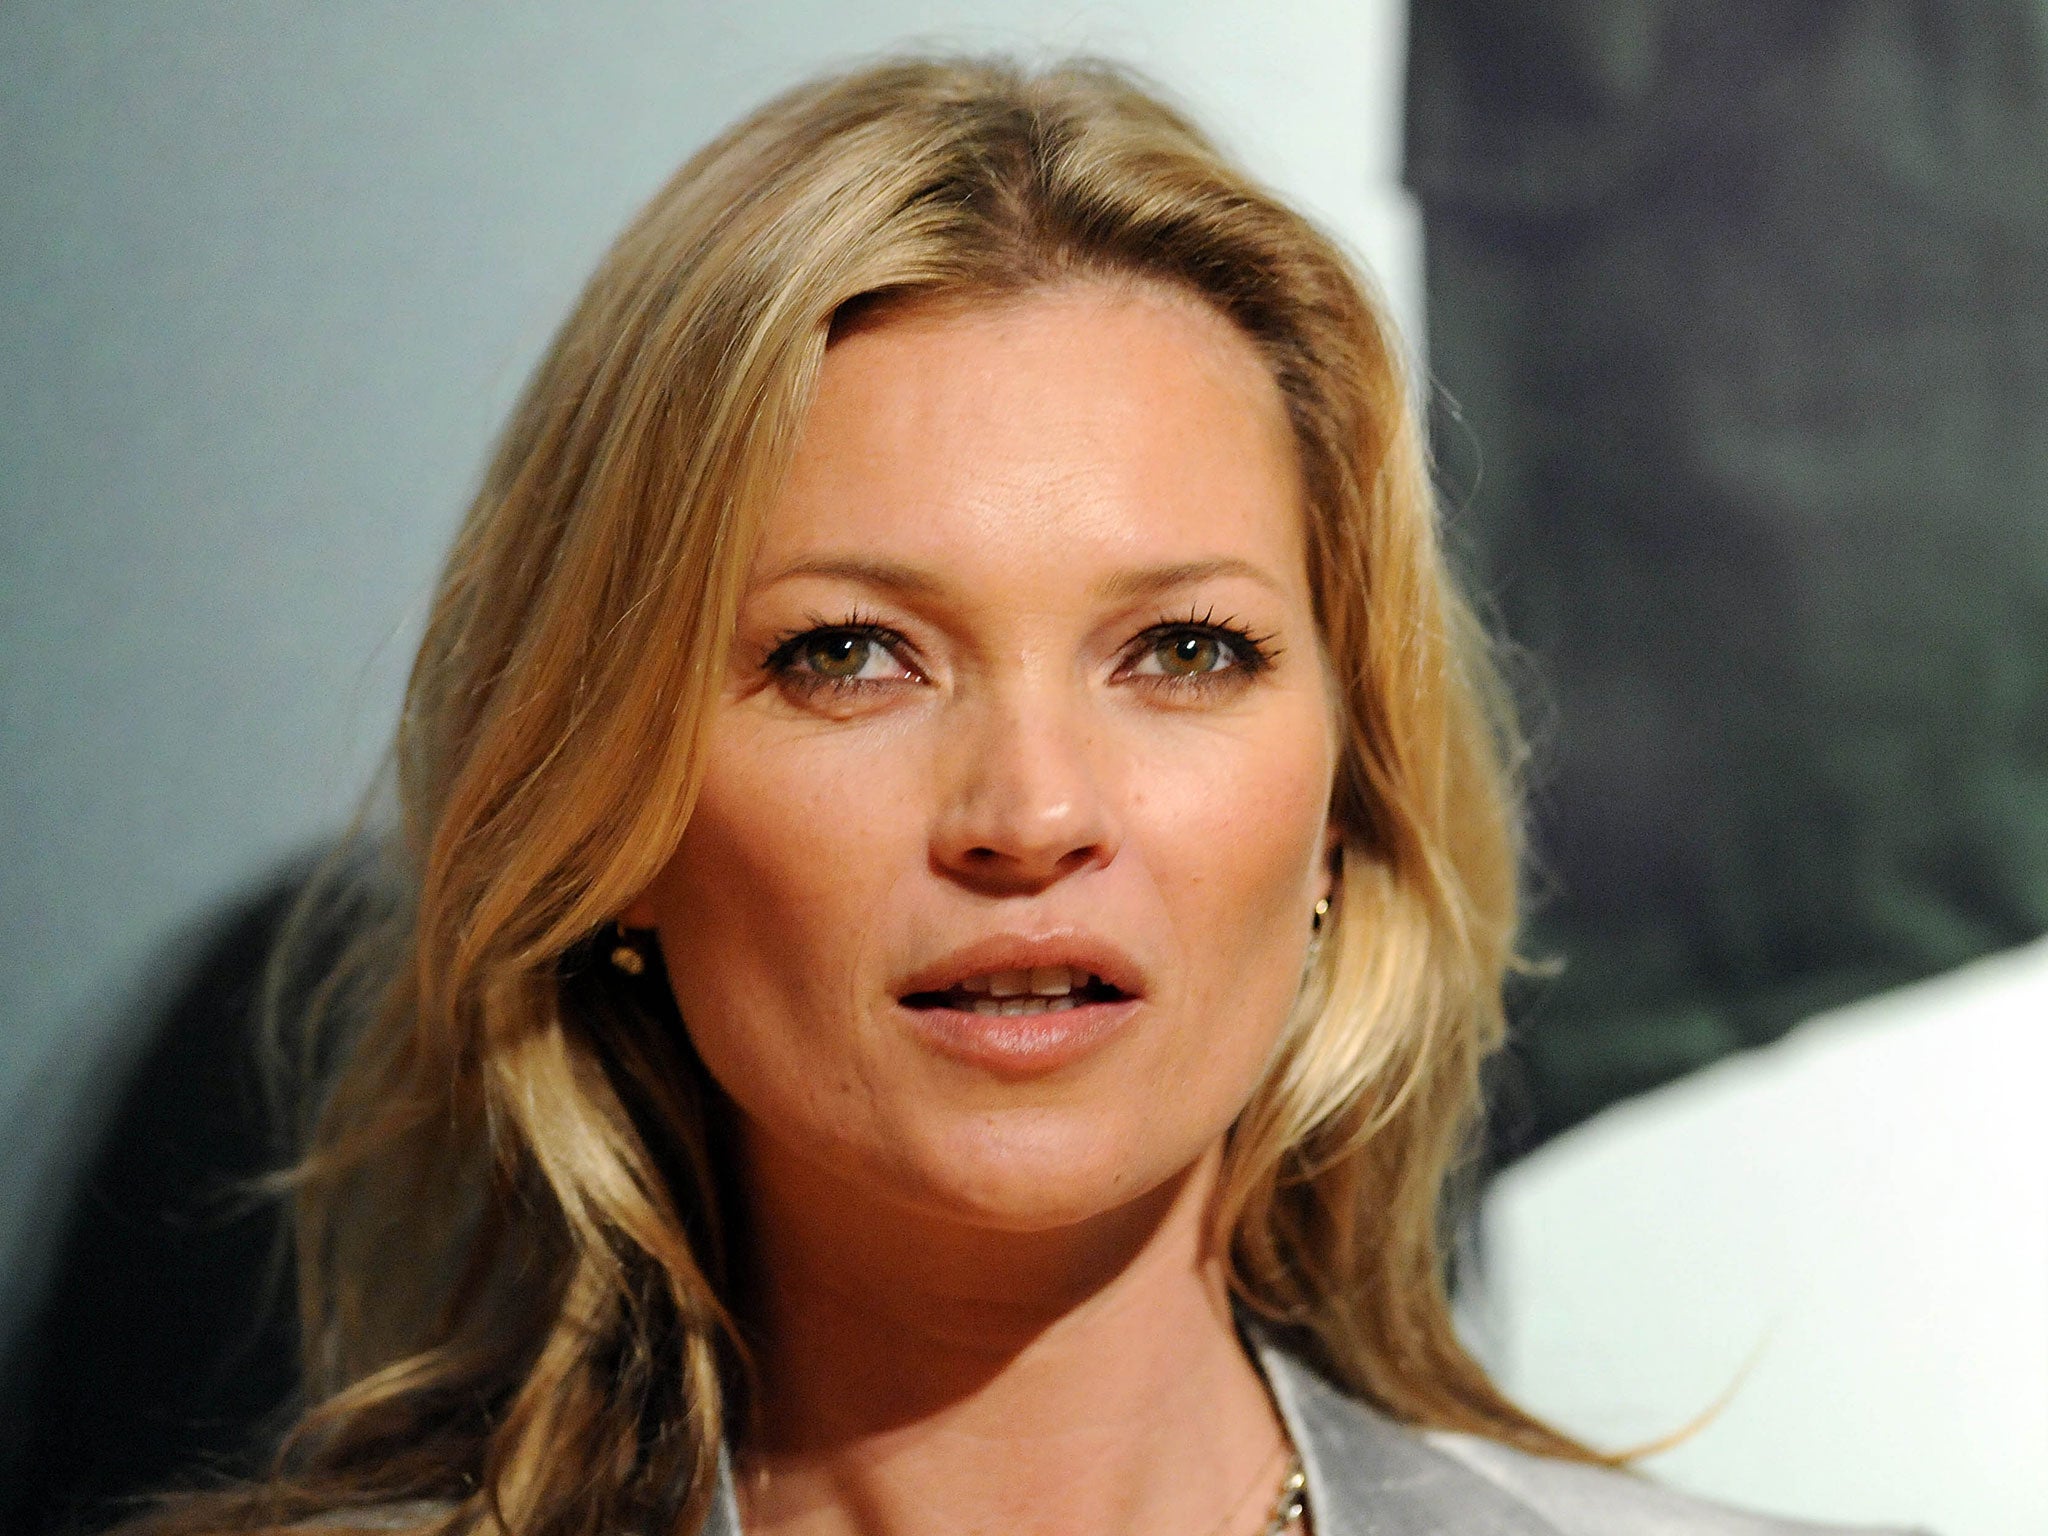 Kate Moss was escorted from the easyJet flight by police